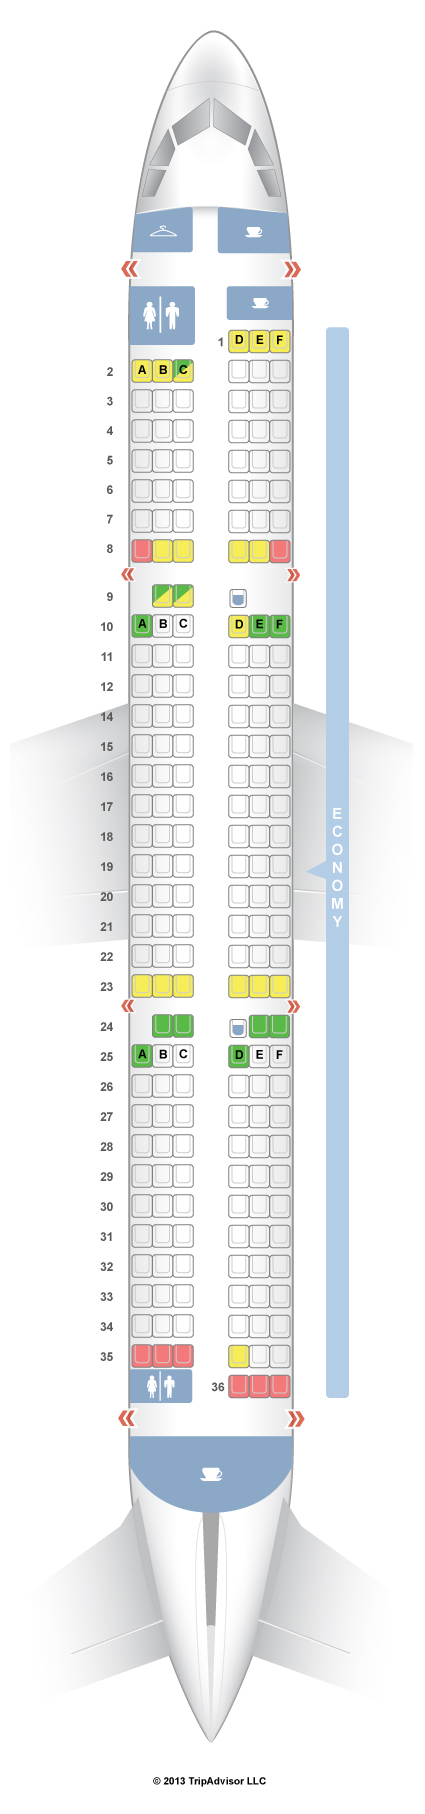 Airbus A321 Jet Seating Chart